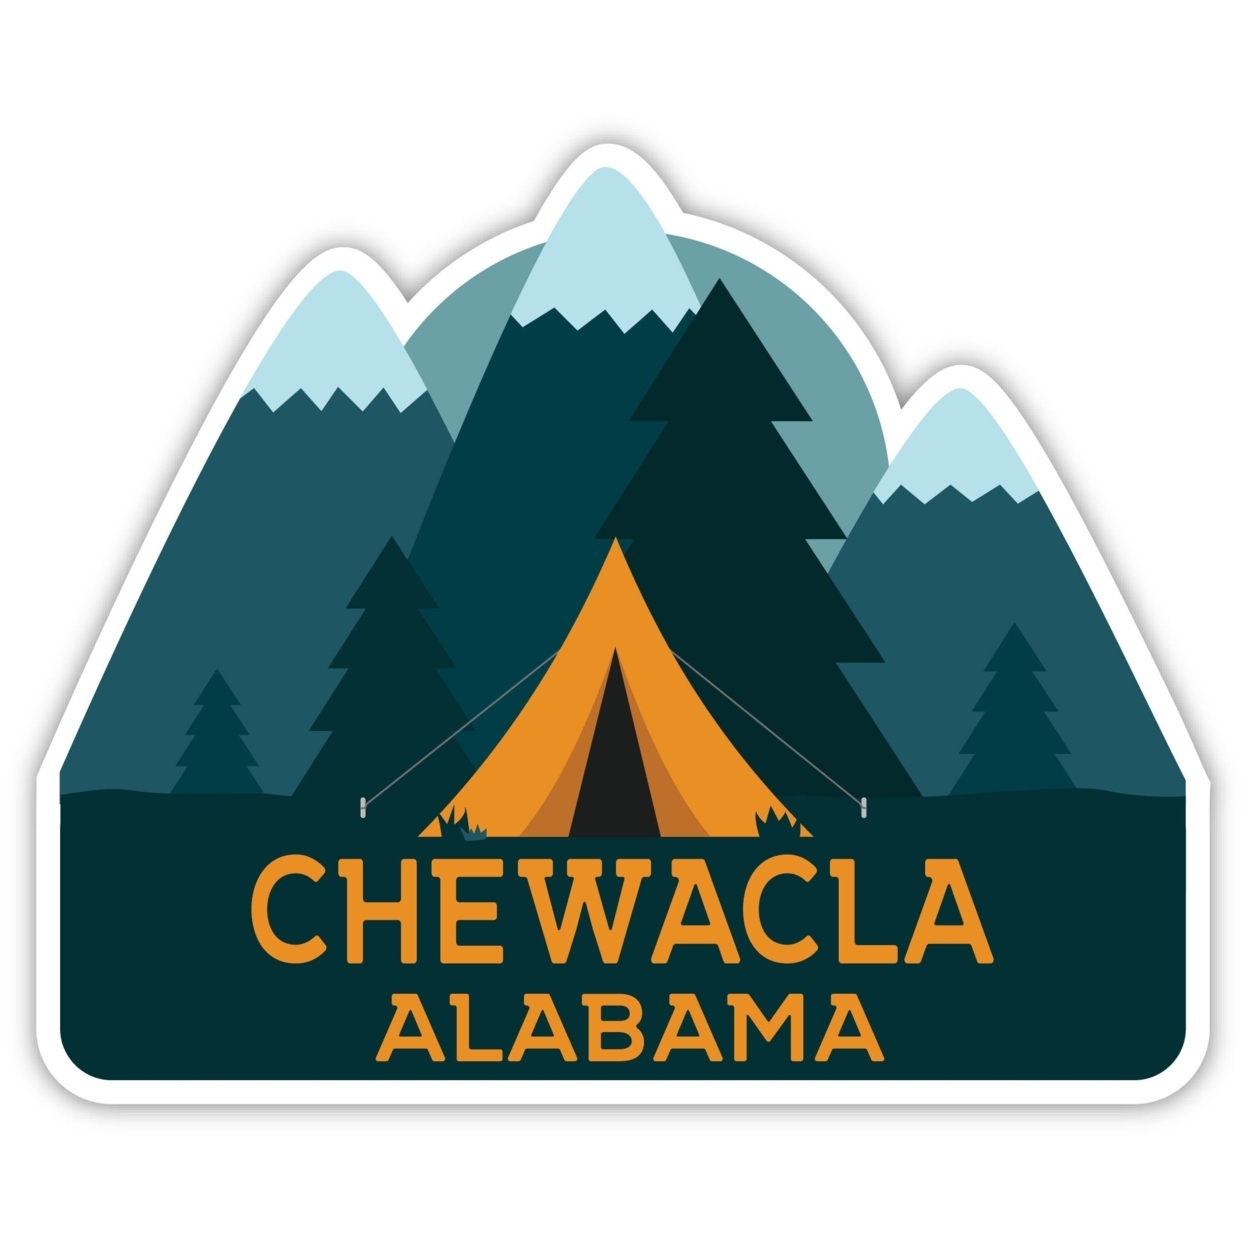 Chewacla Alabama Souvenir Decorative Stickers (Choose Theme And Size) - 4-Pack, 12-Inch, Tent